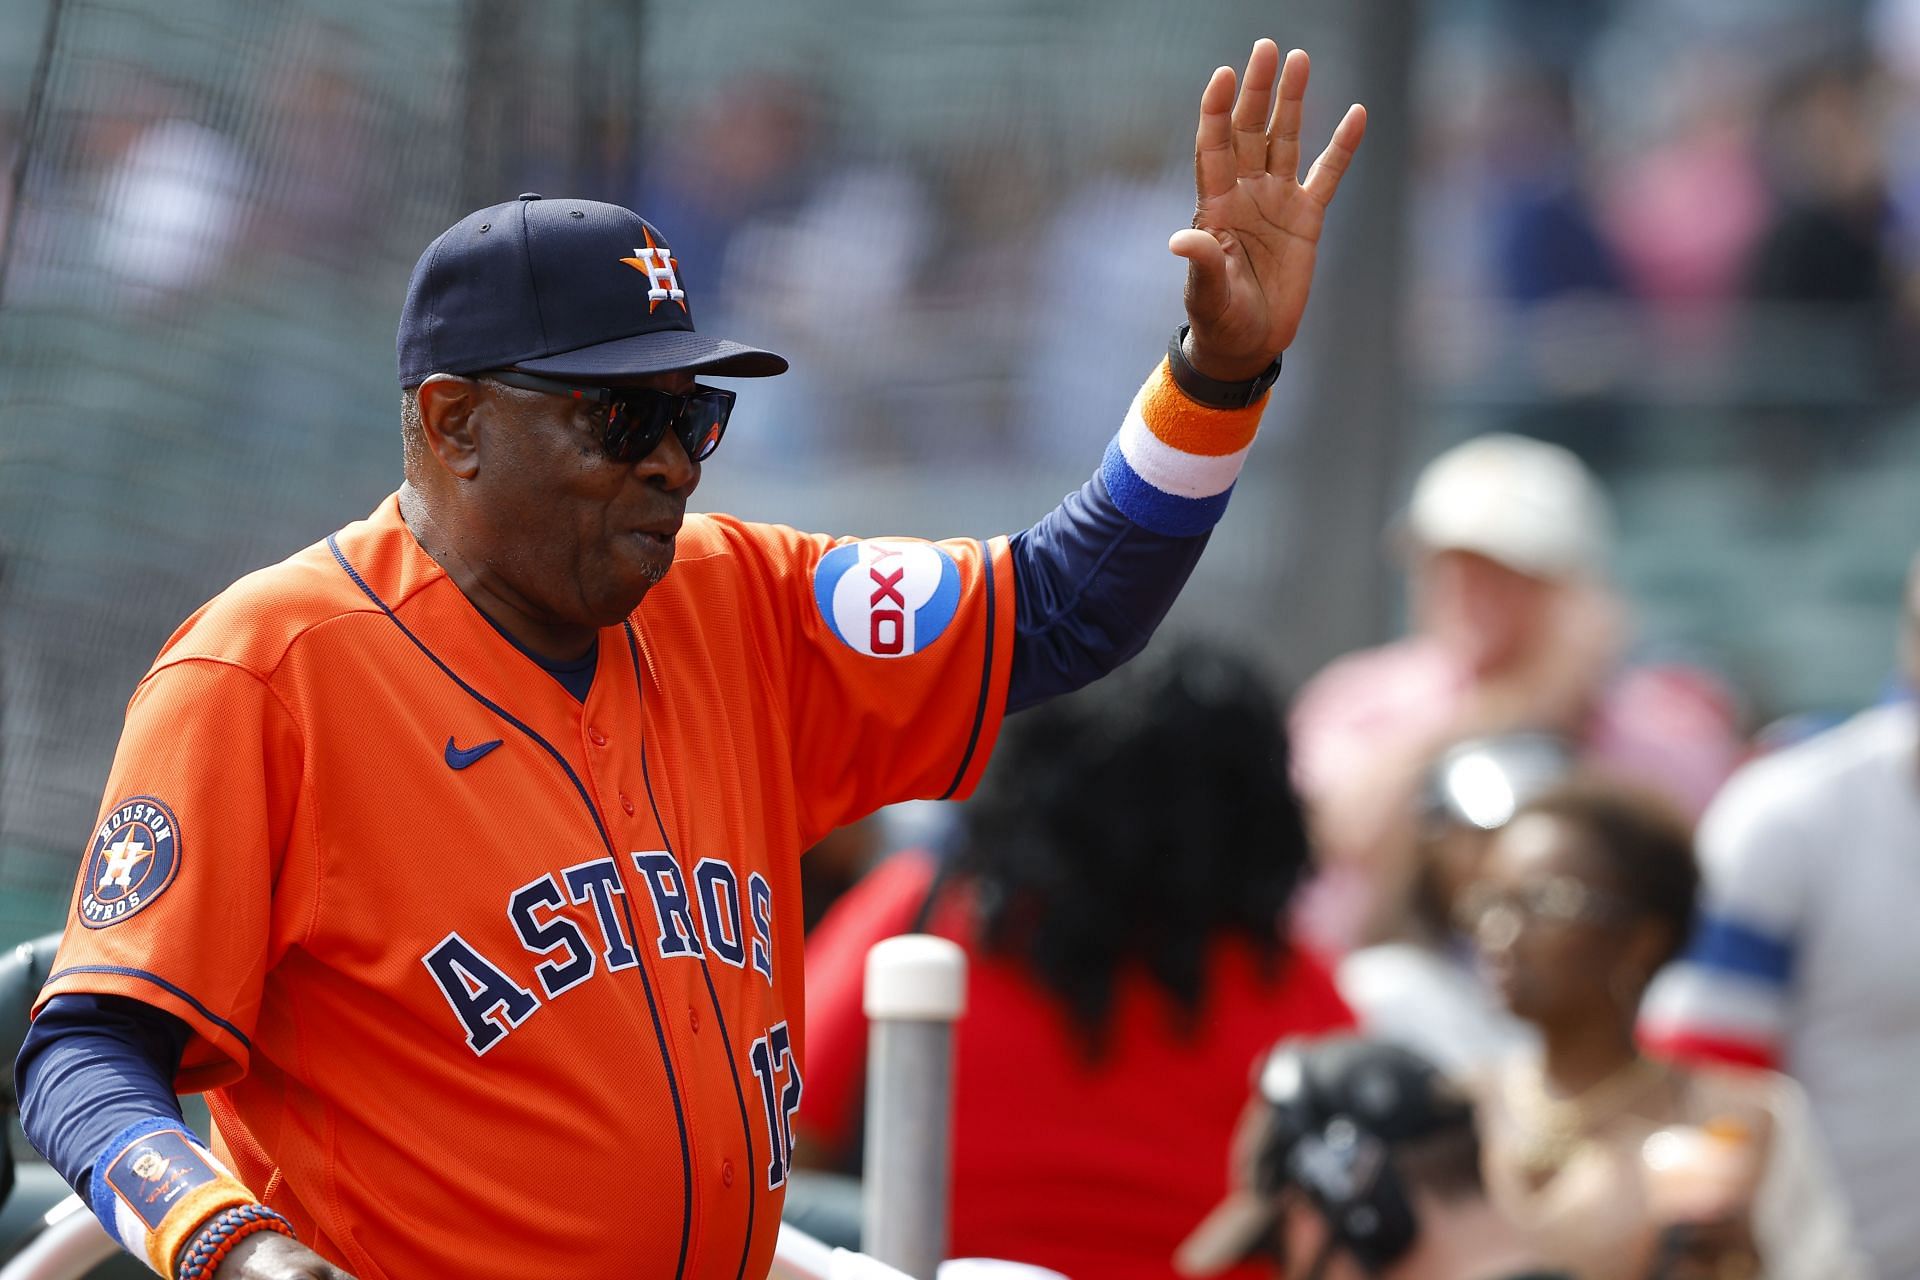 Dusty Baker Jr. of the Houston Astros waves to fans after defeating the Atlanta Braves at Truist Park